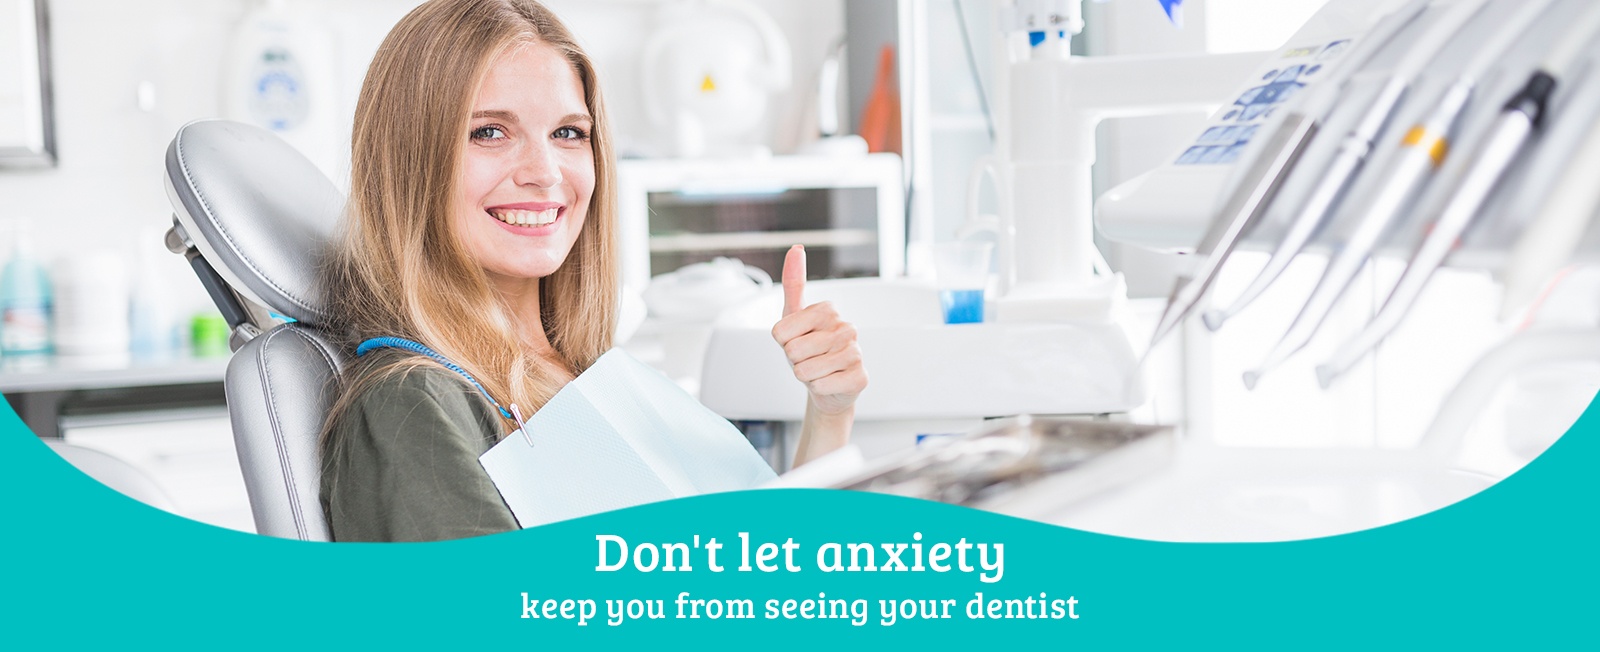 Laughing Gas - Dentistry Services by Dentists on Bloor